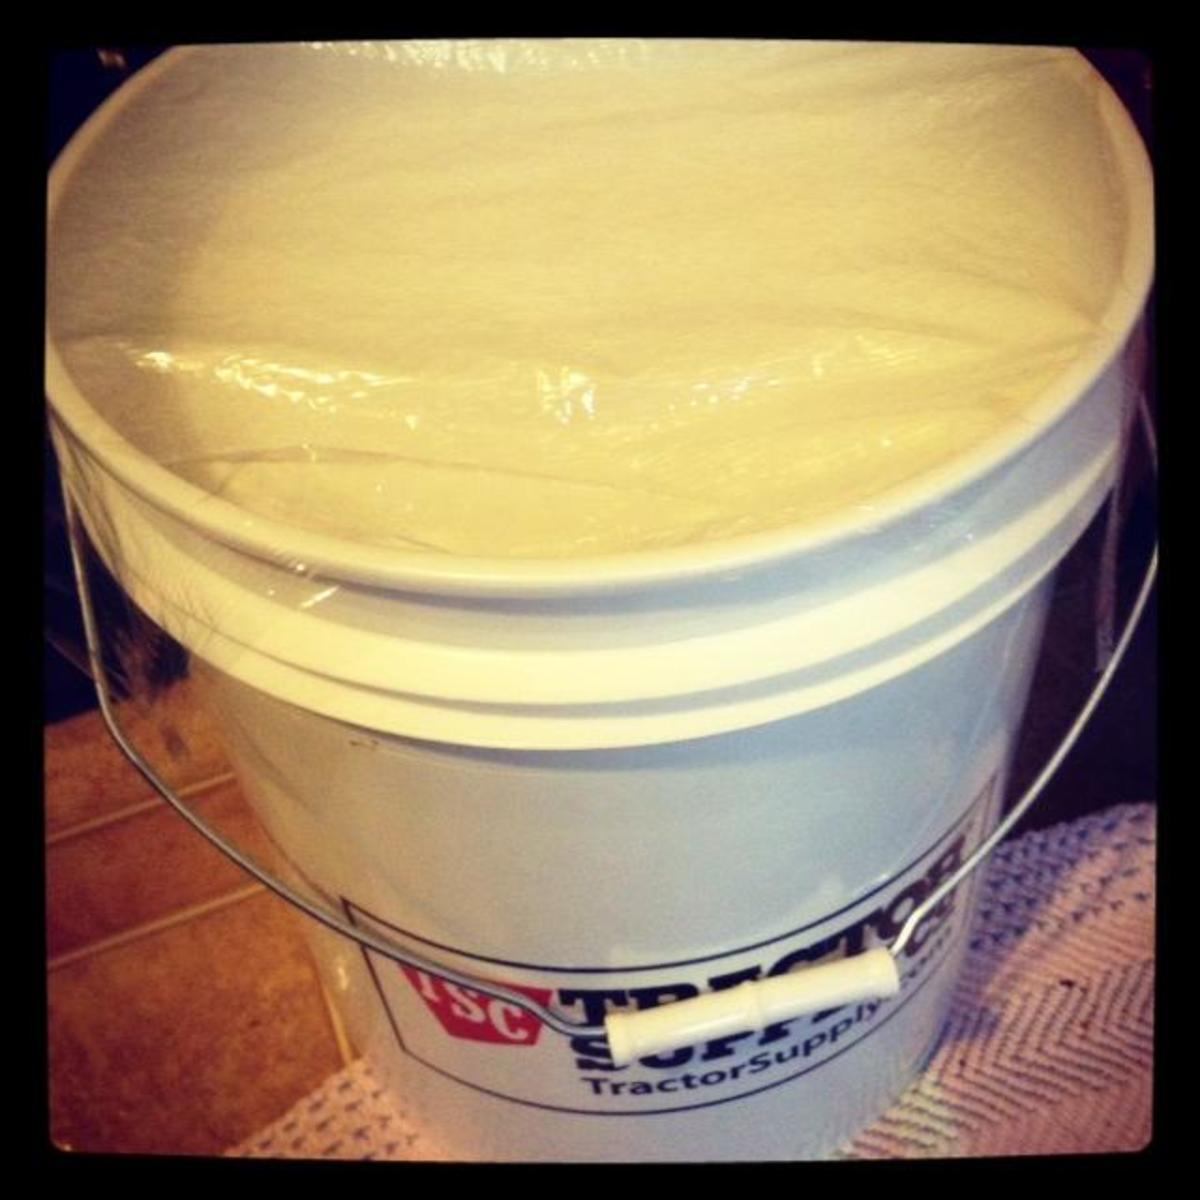 A completed 5-gallon bucket of homemade laundry soap.